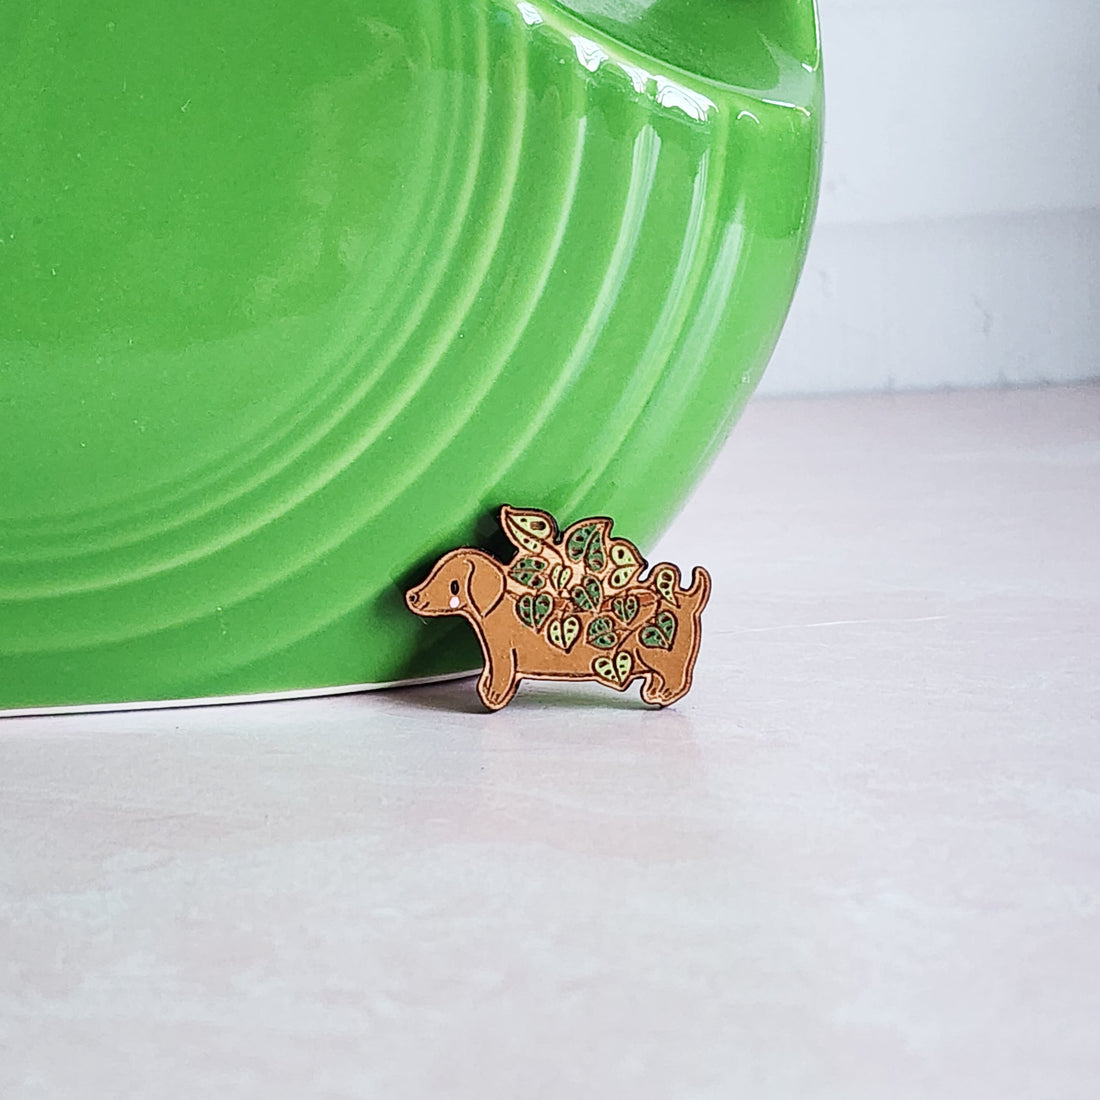 brown dachshund planter pin with leaves in front of a green vase